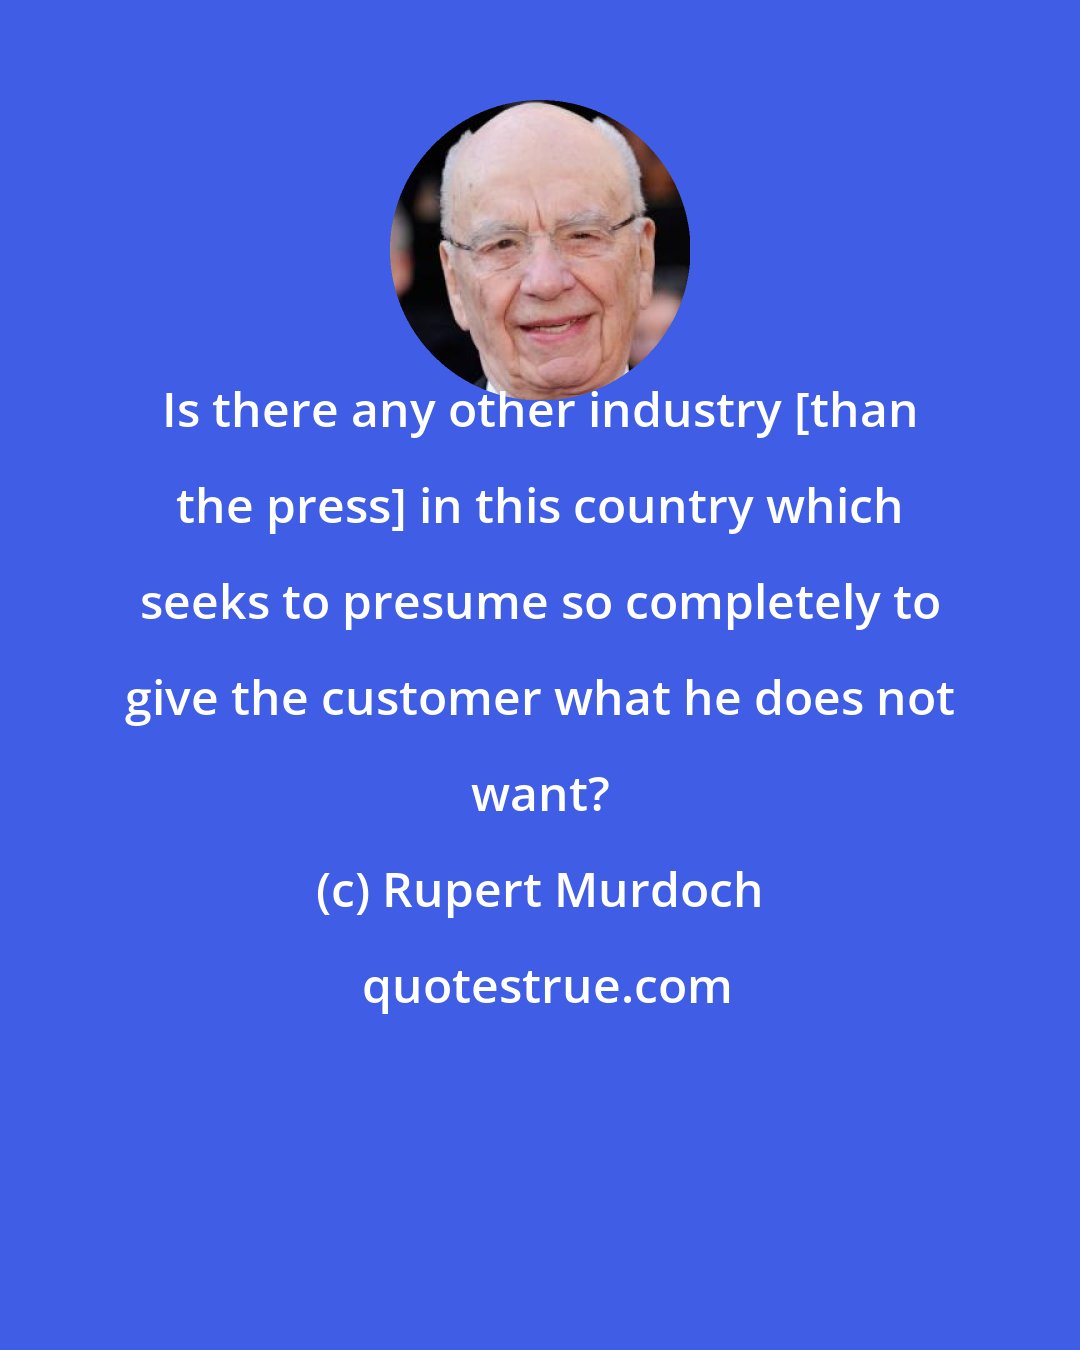 Rupert Murdoch: Is there any other industry [than the press] in this country which seeks to presume so completely to give the customer what he does not want?